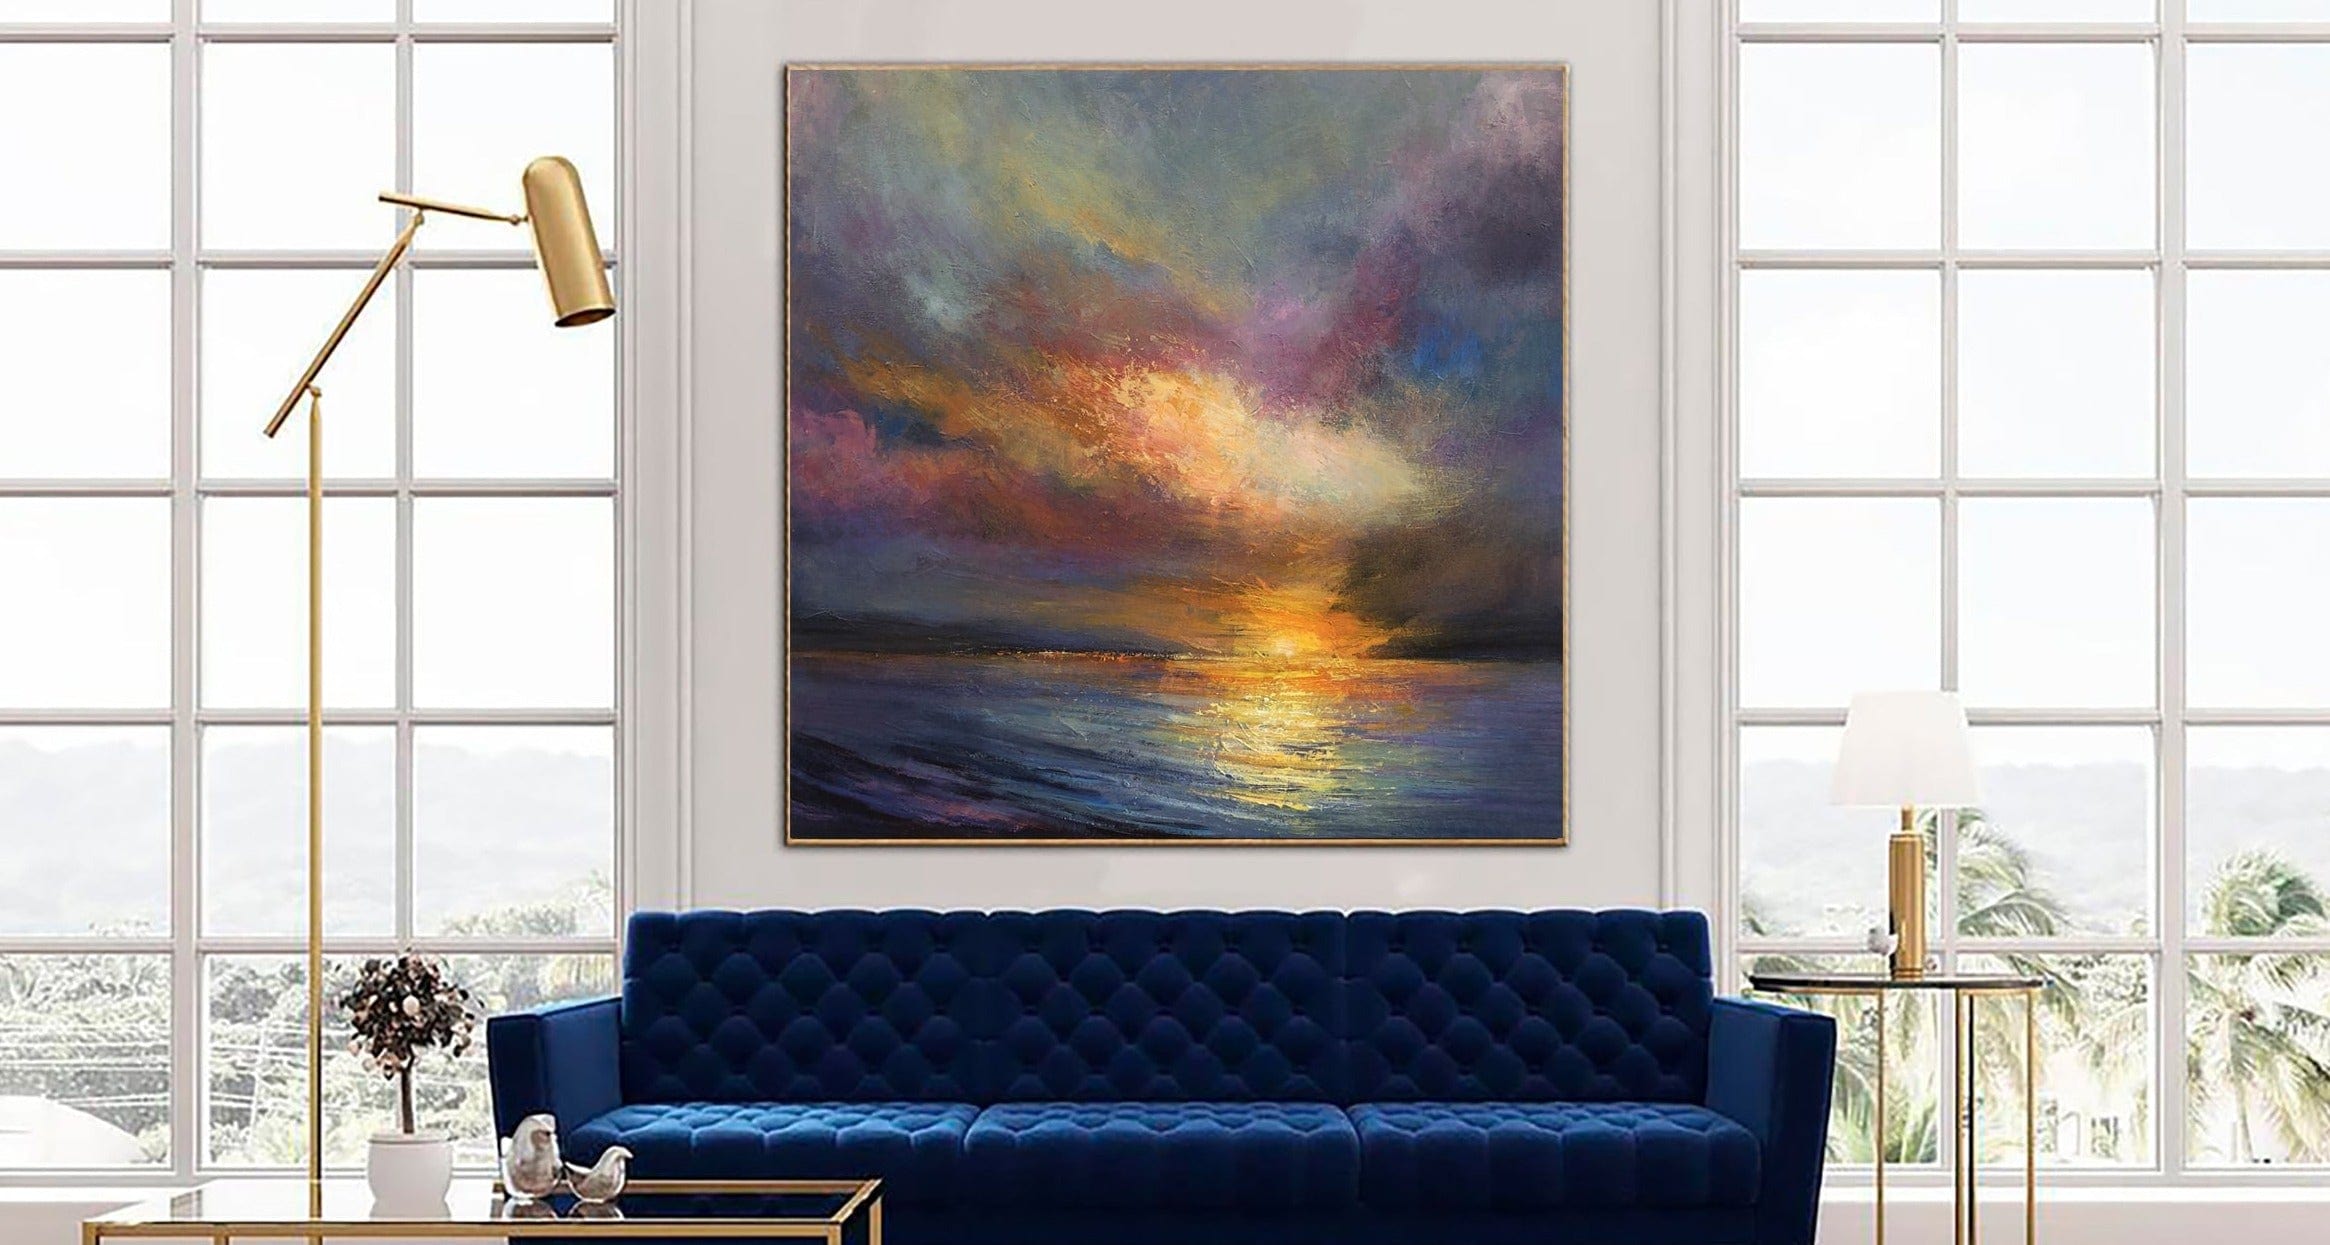 SUNSET OVER THE OCEAN by Balina from $304